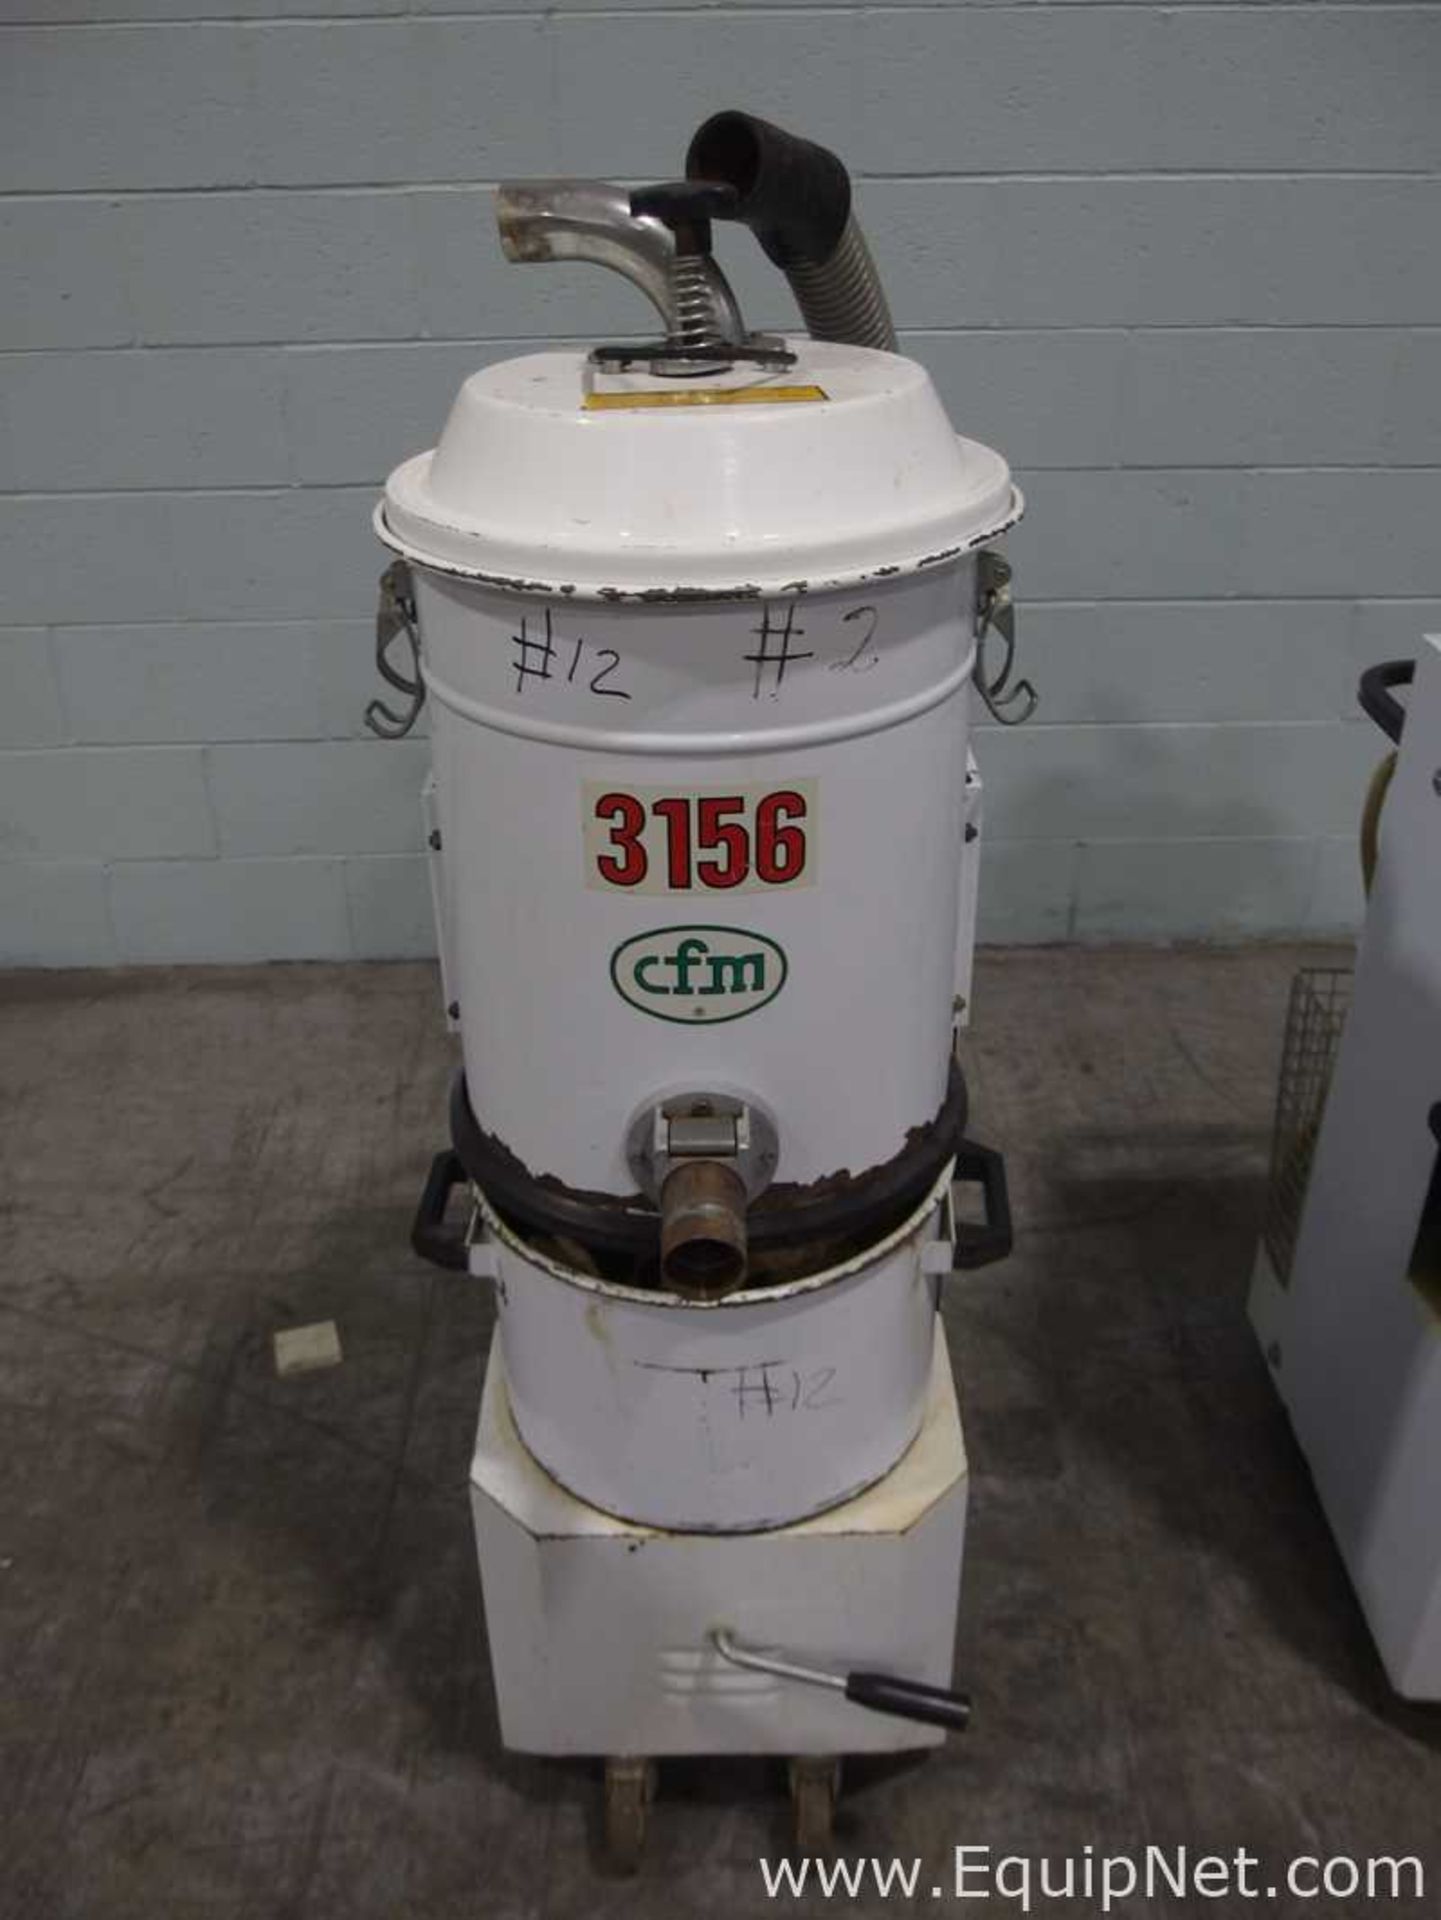 Lot of 2 CFM 3156 Industrial Vacuums - Image 2 of 14